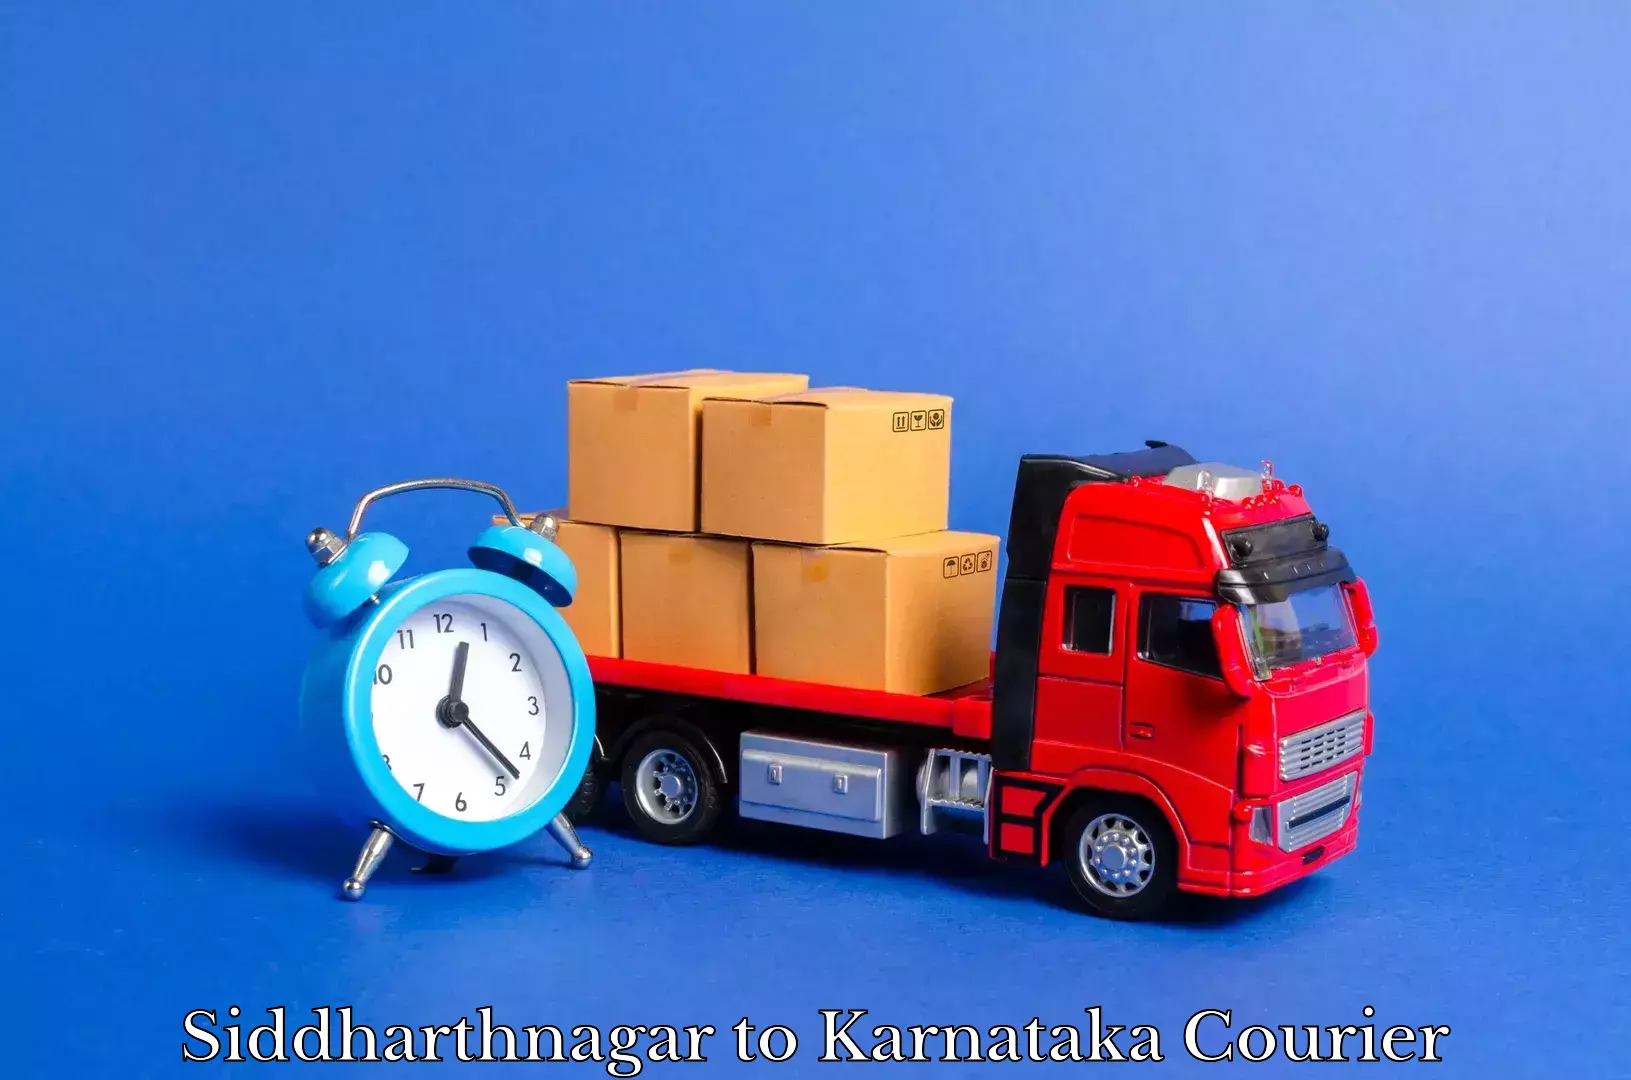 Quality relocation assistance Siddharthnagar to Manipal